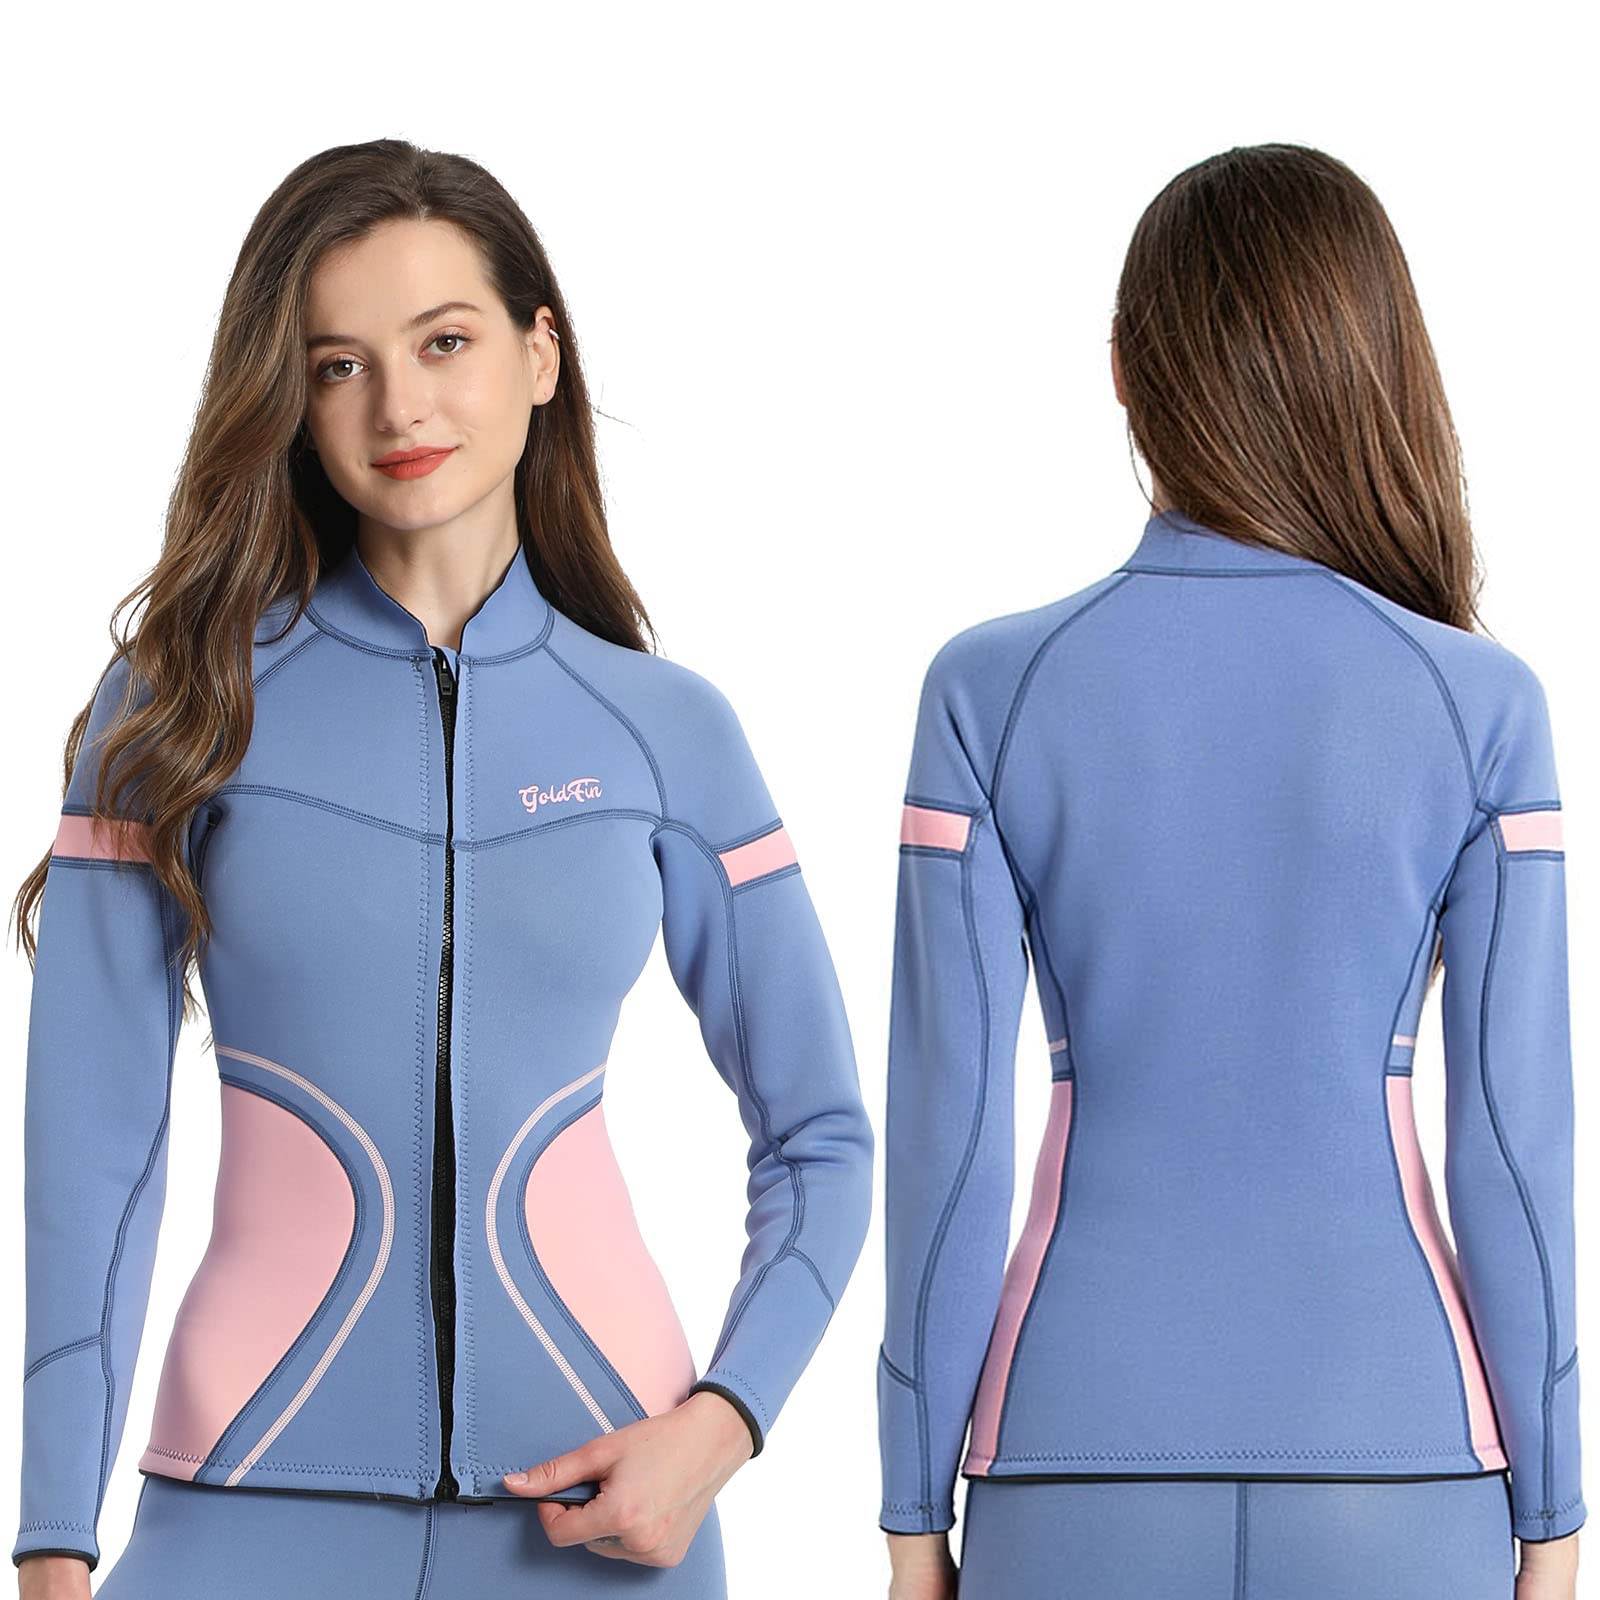 Goldfin 3mm Wetsuit Women Large Top Bottoms Black Turquoise Full Top ...